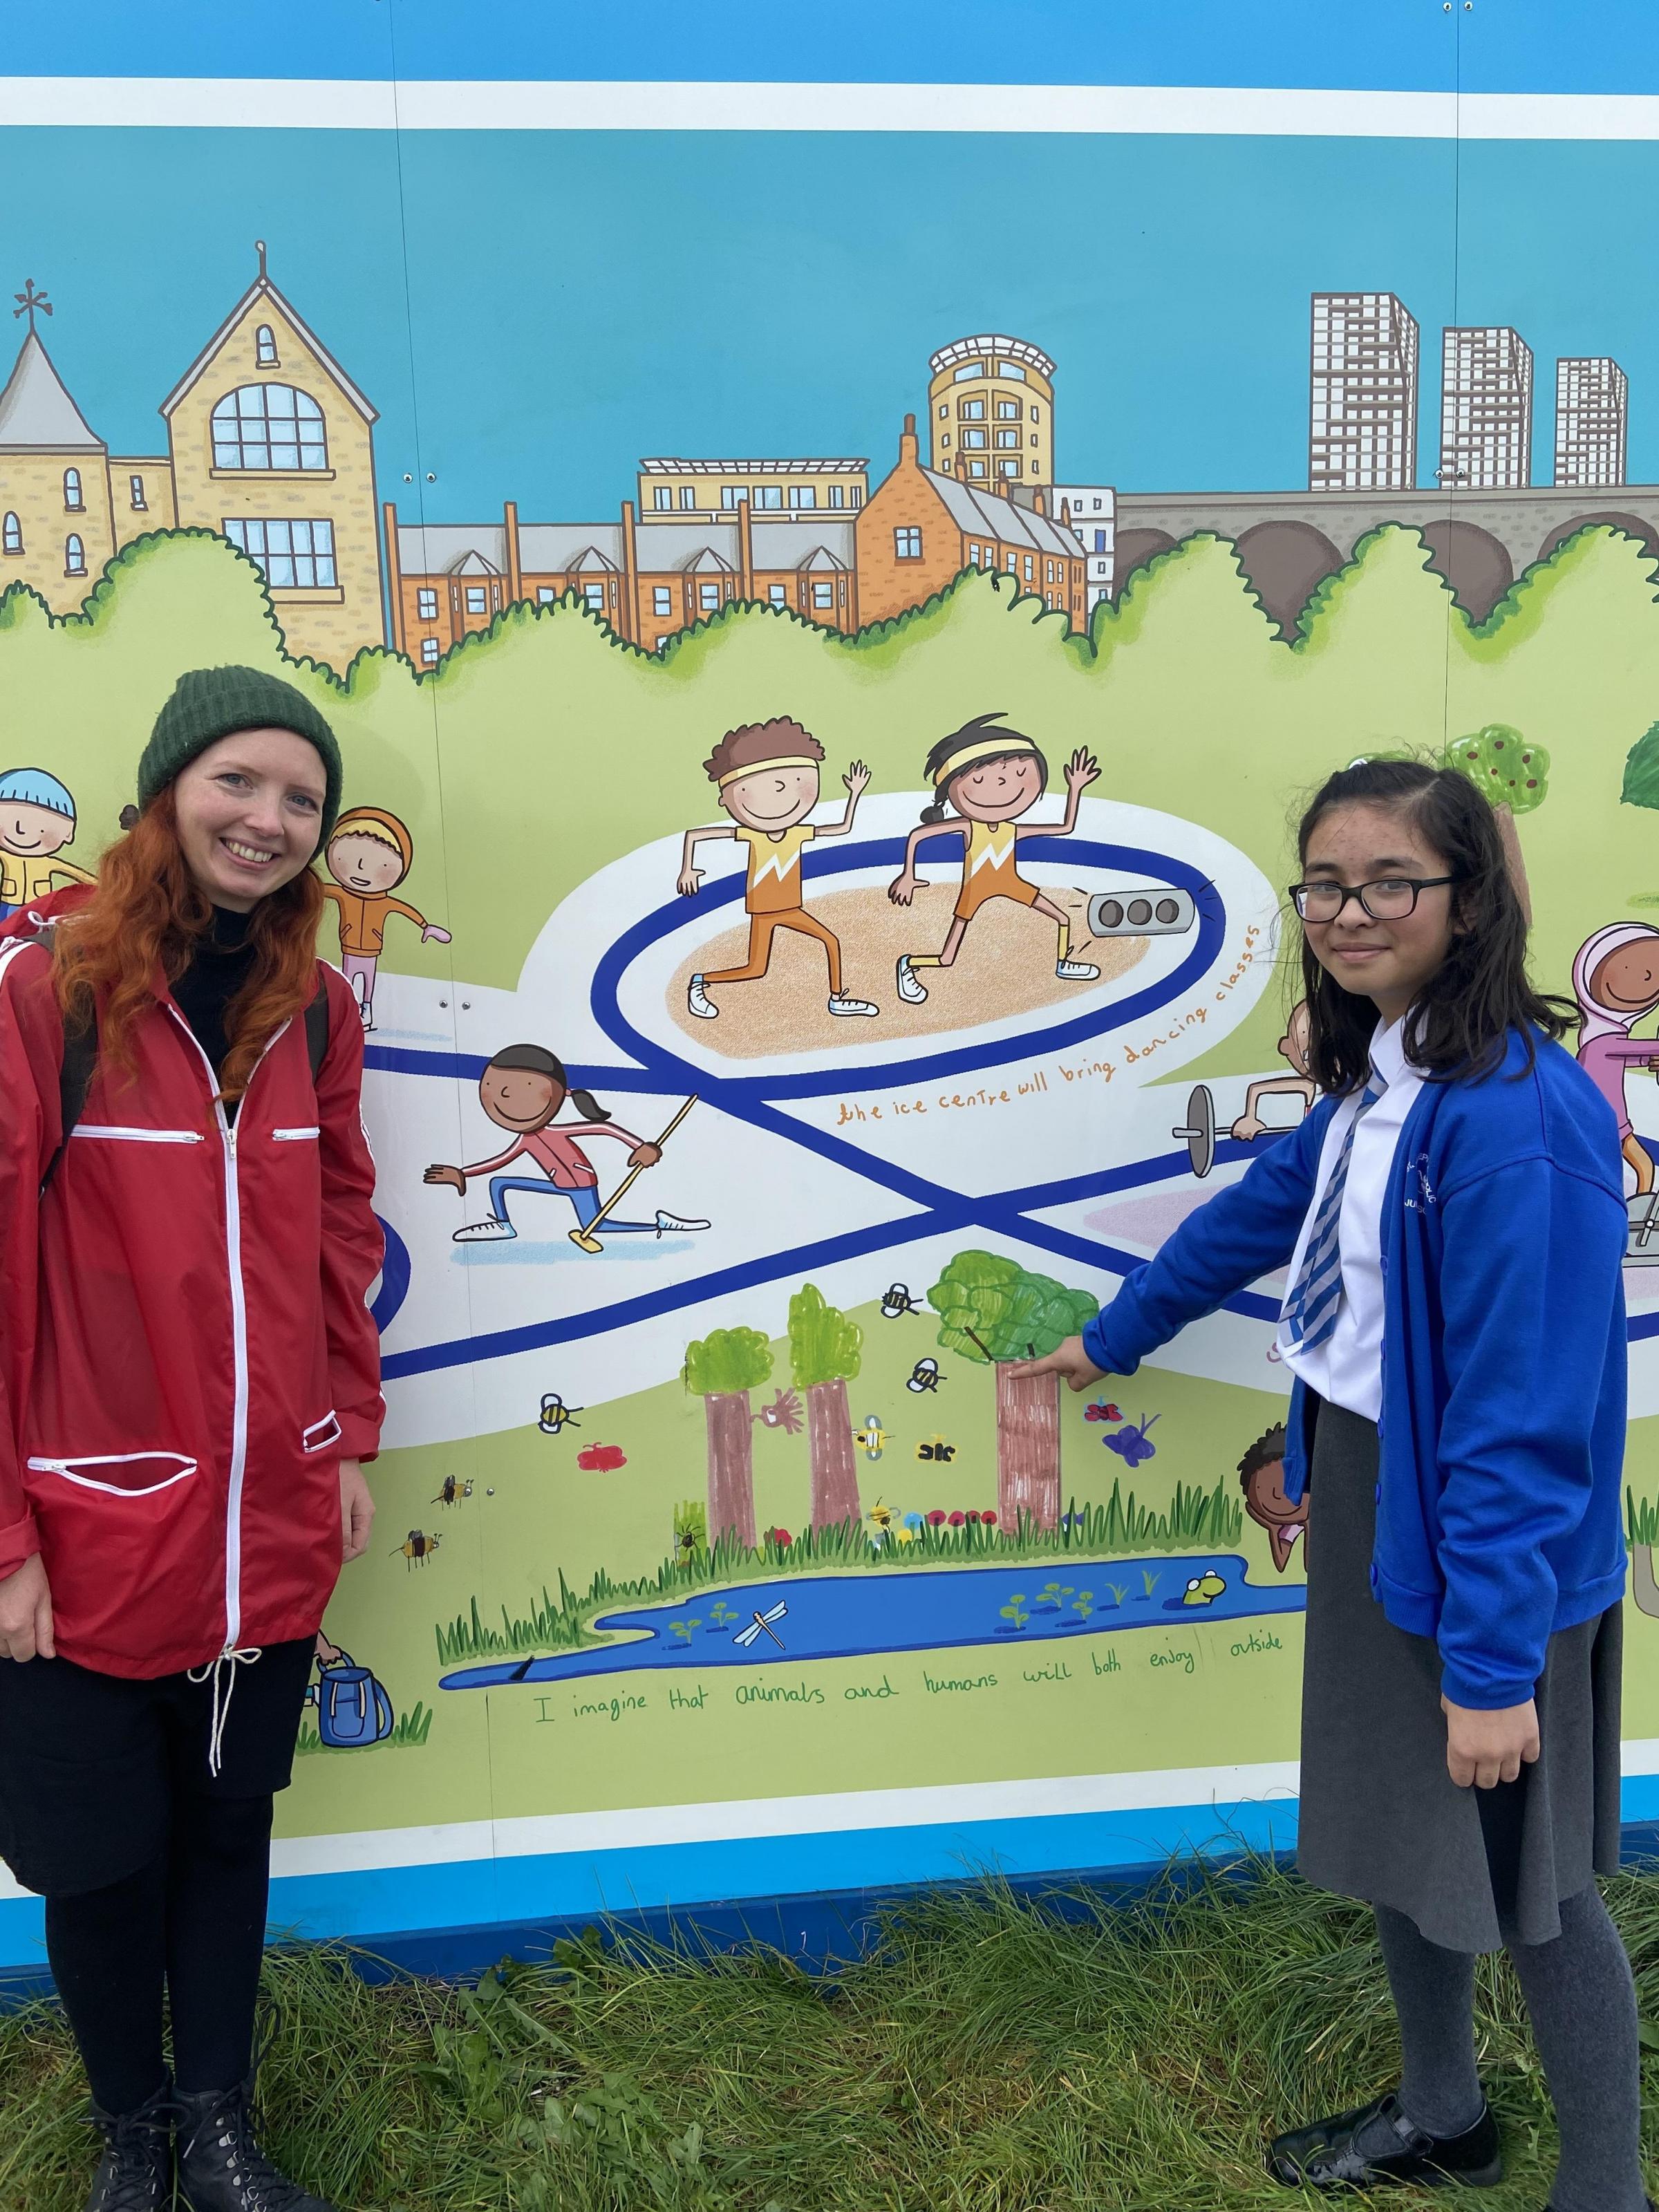 Artist Alice Druitt with Sarah, 10 from St Joseph’s Catholic Junior School who is pointing at her trees which contributed to the final hoarding artwork.